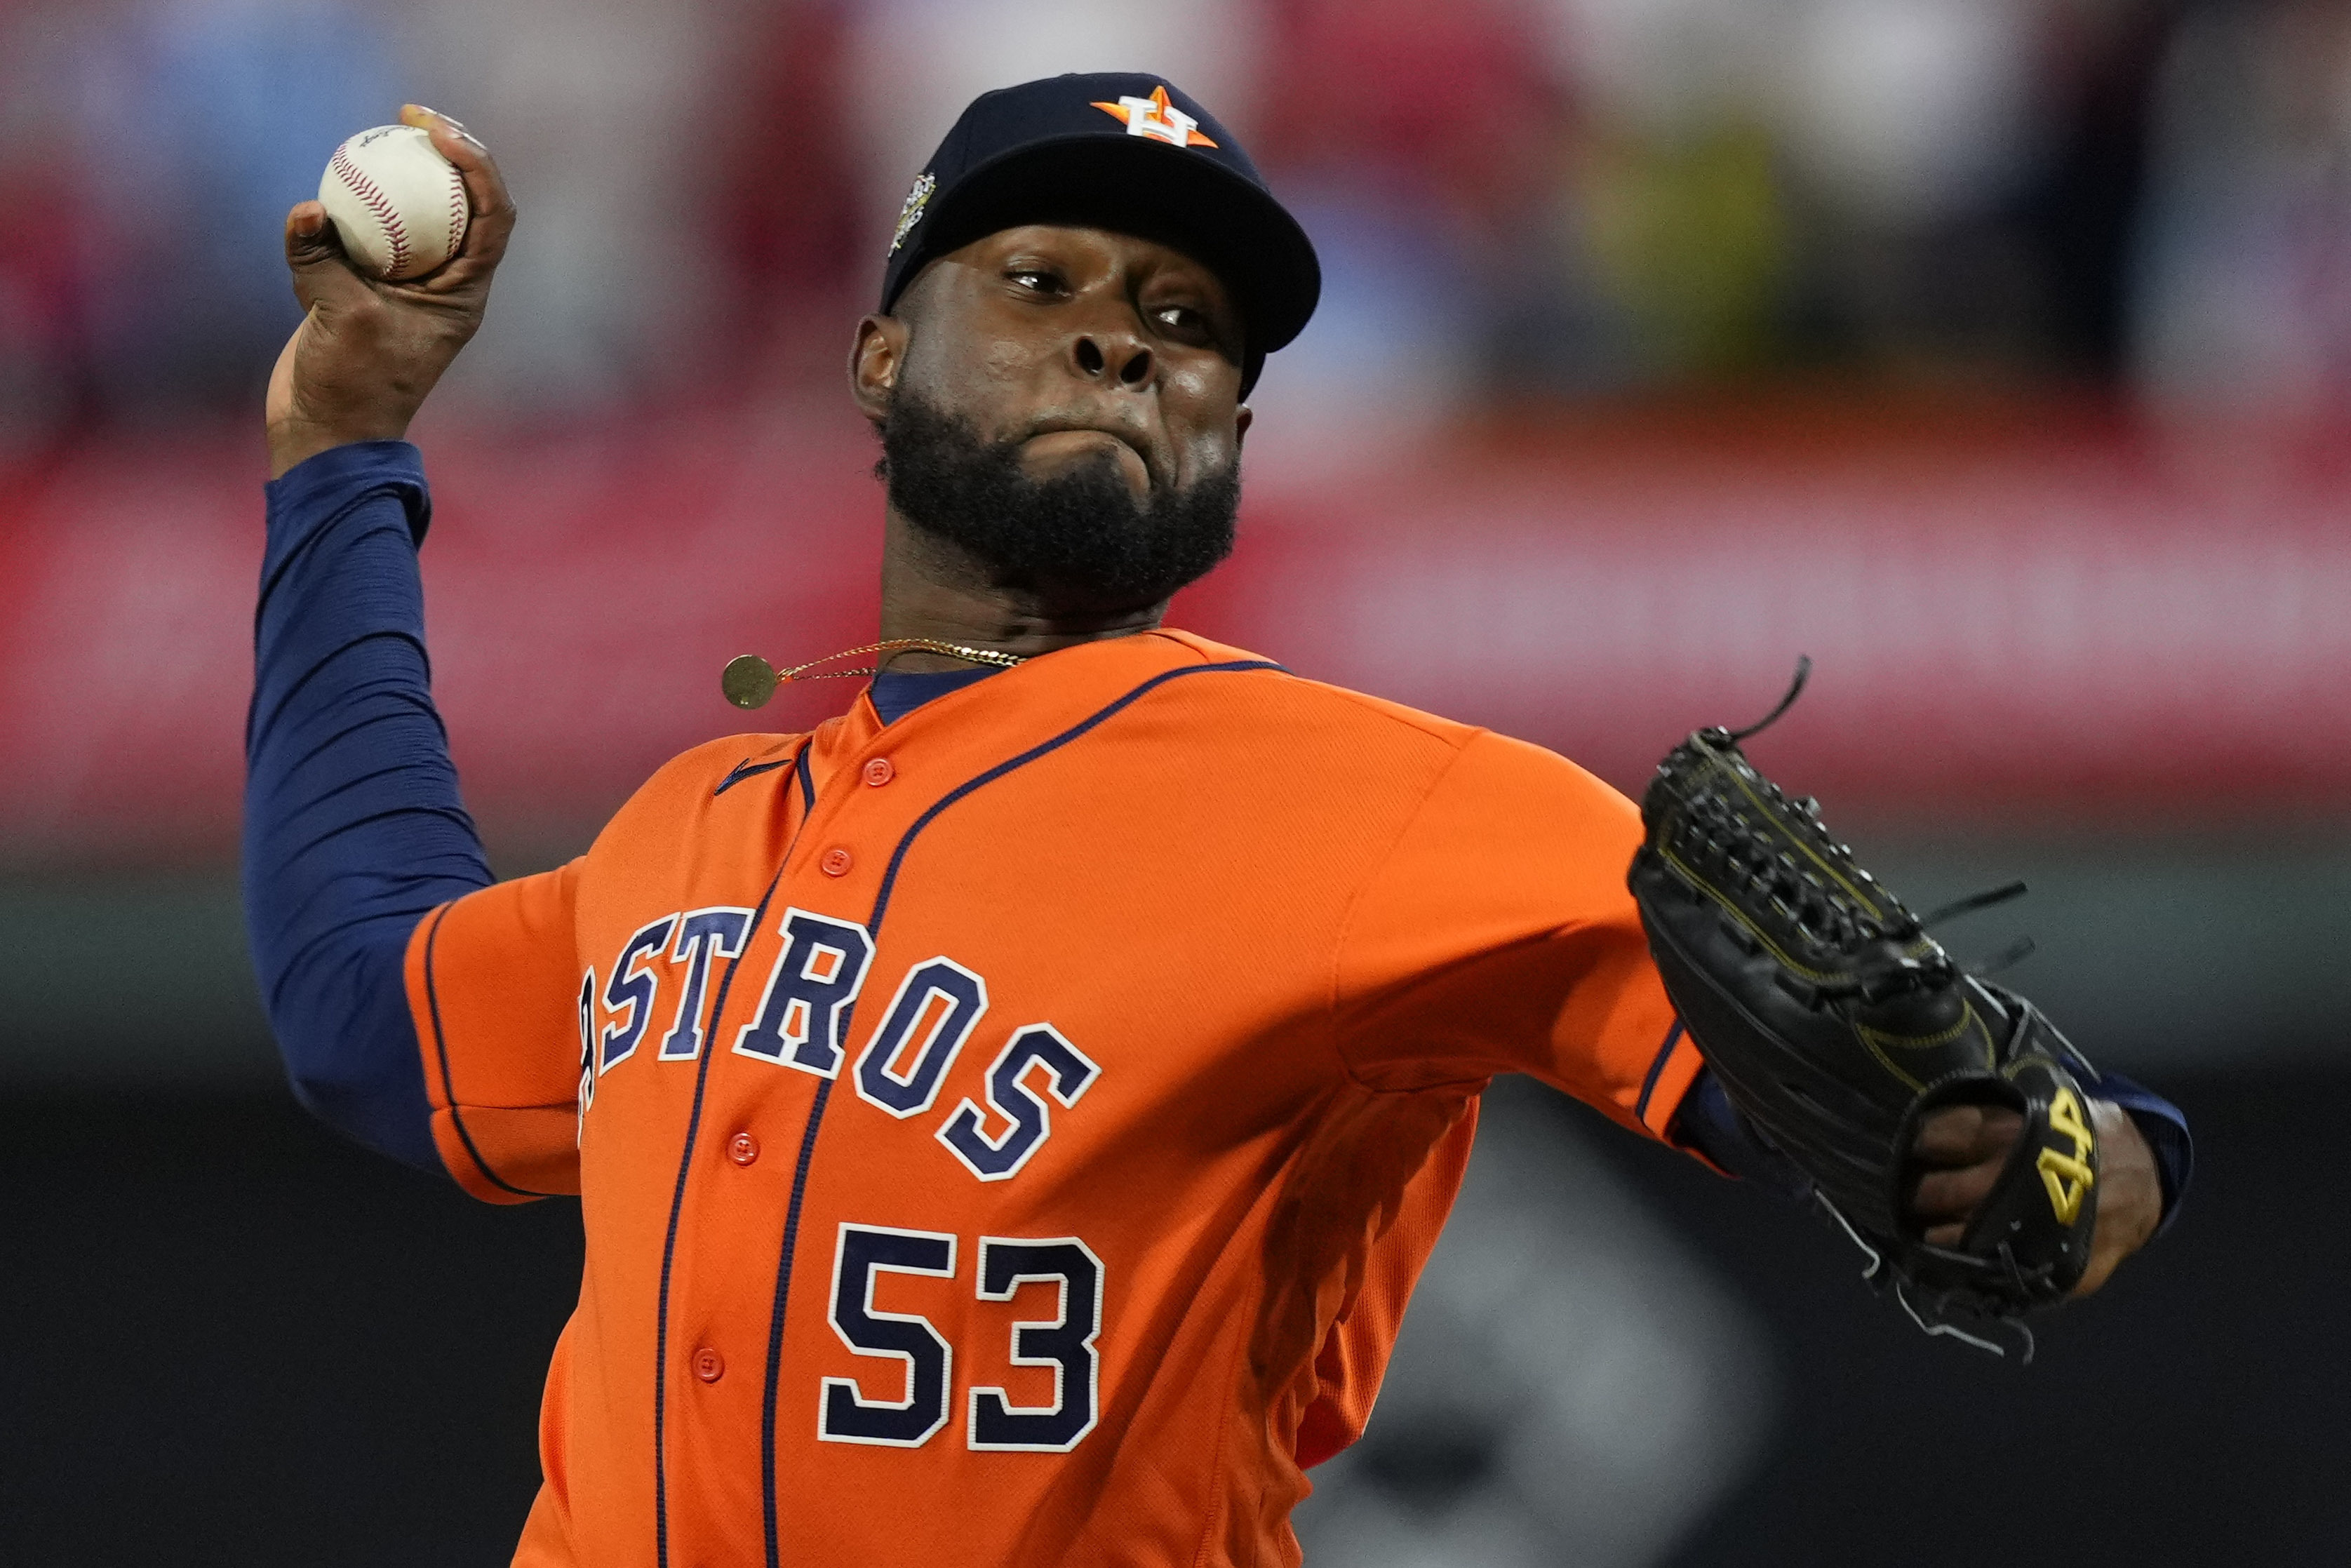 Cristian Javier, Astros agree to $64M, 5-year contract